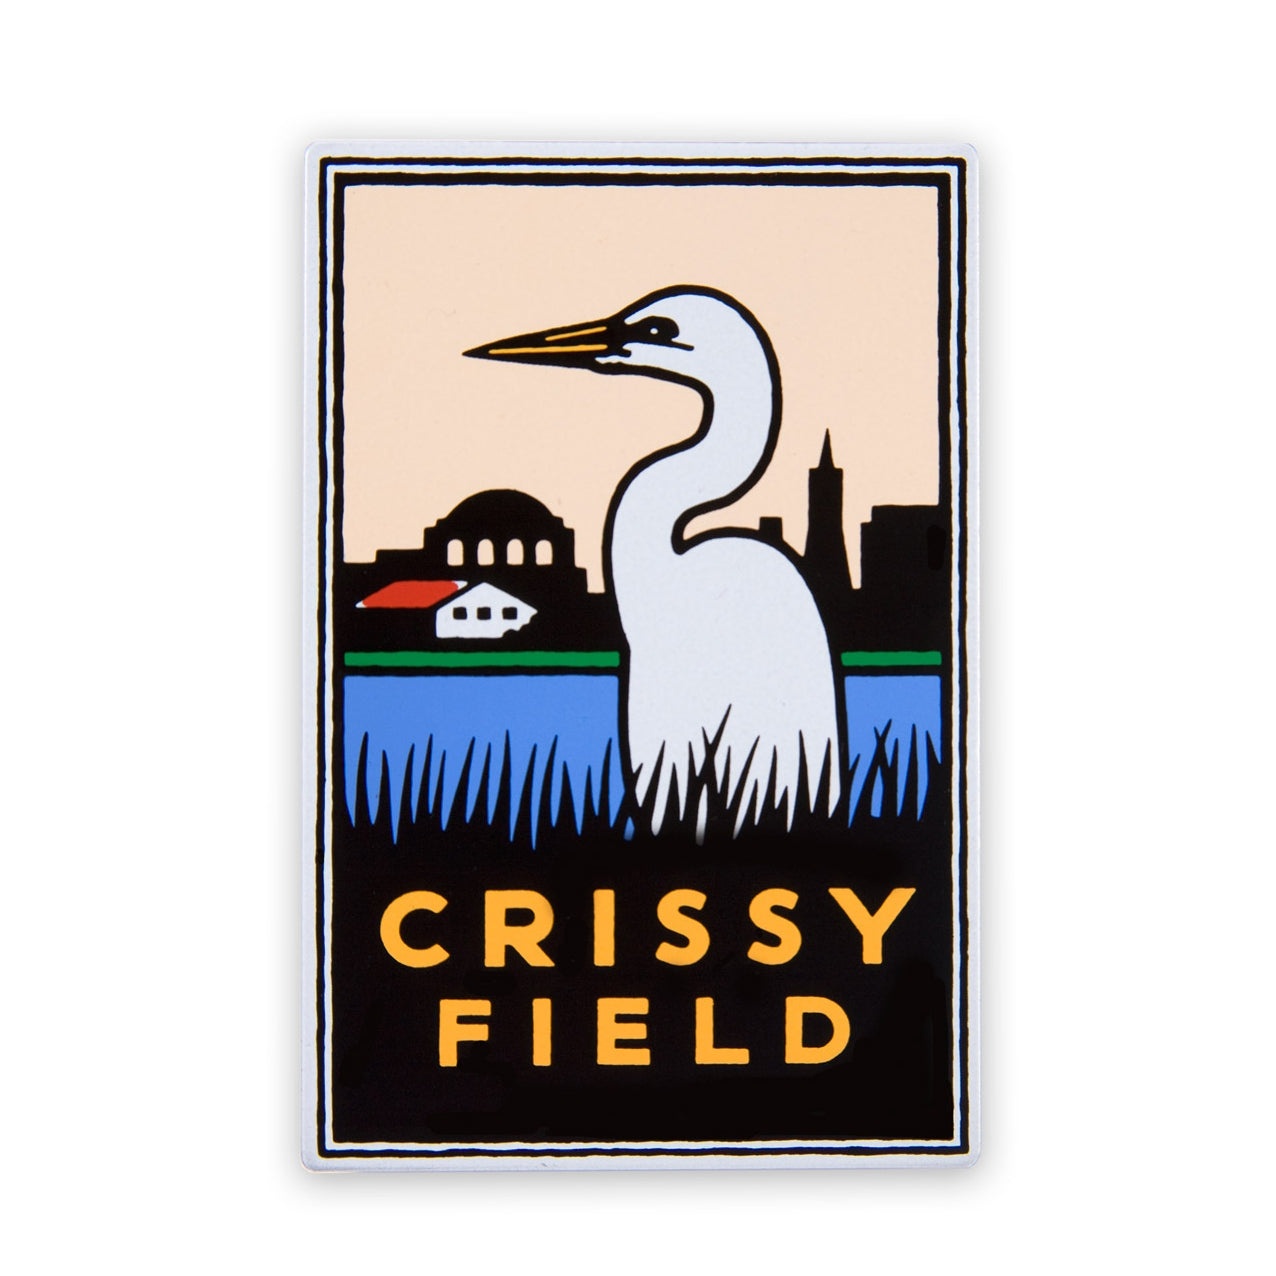 Rectangular pin with colorful illustration of shoreline marsh, egret, and San Francisco skyline, with orange “Crissy Field” text. Art by Michael Schwab.